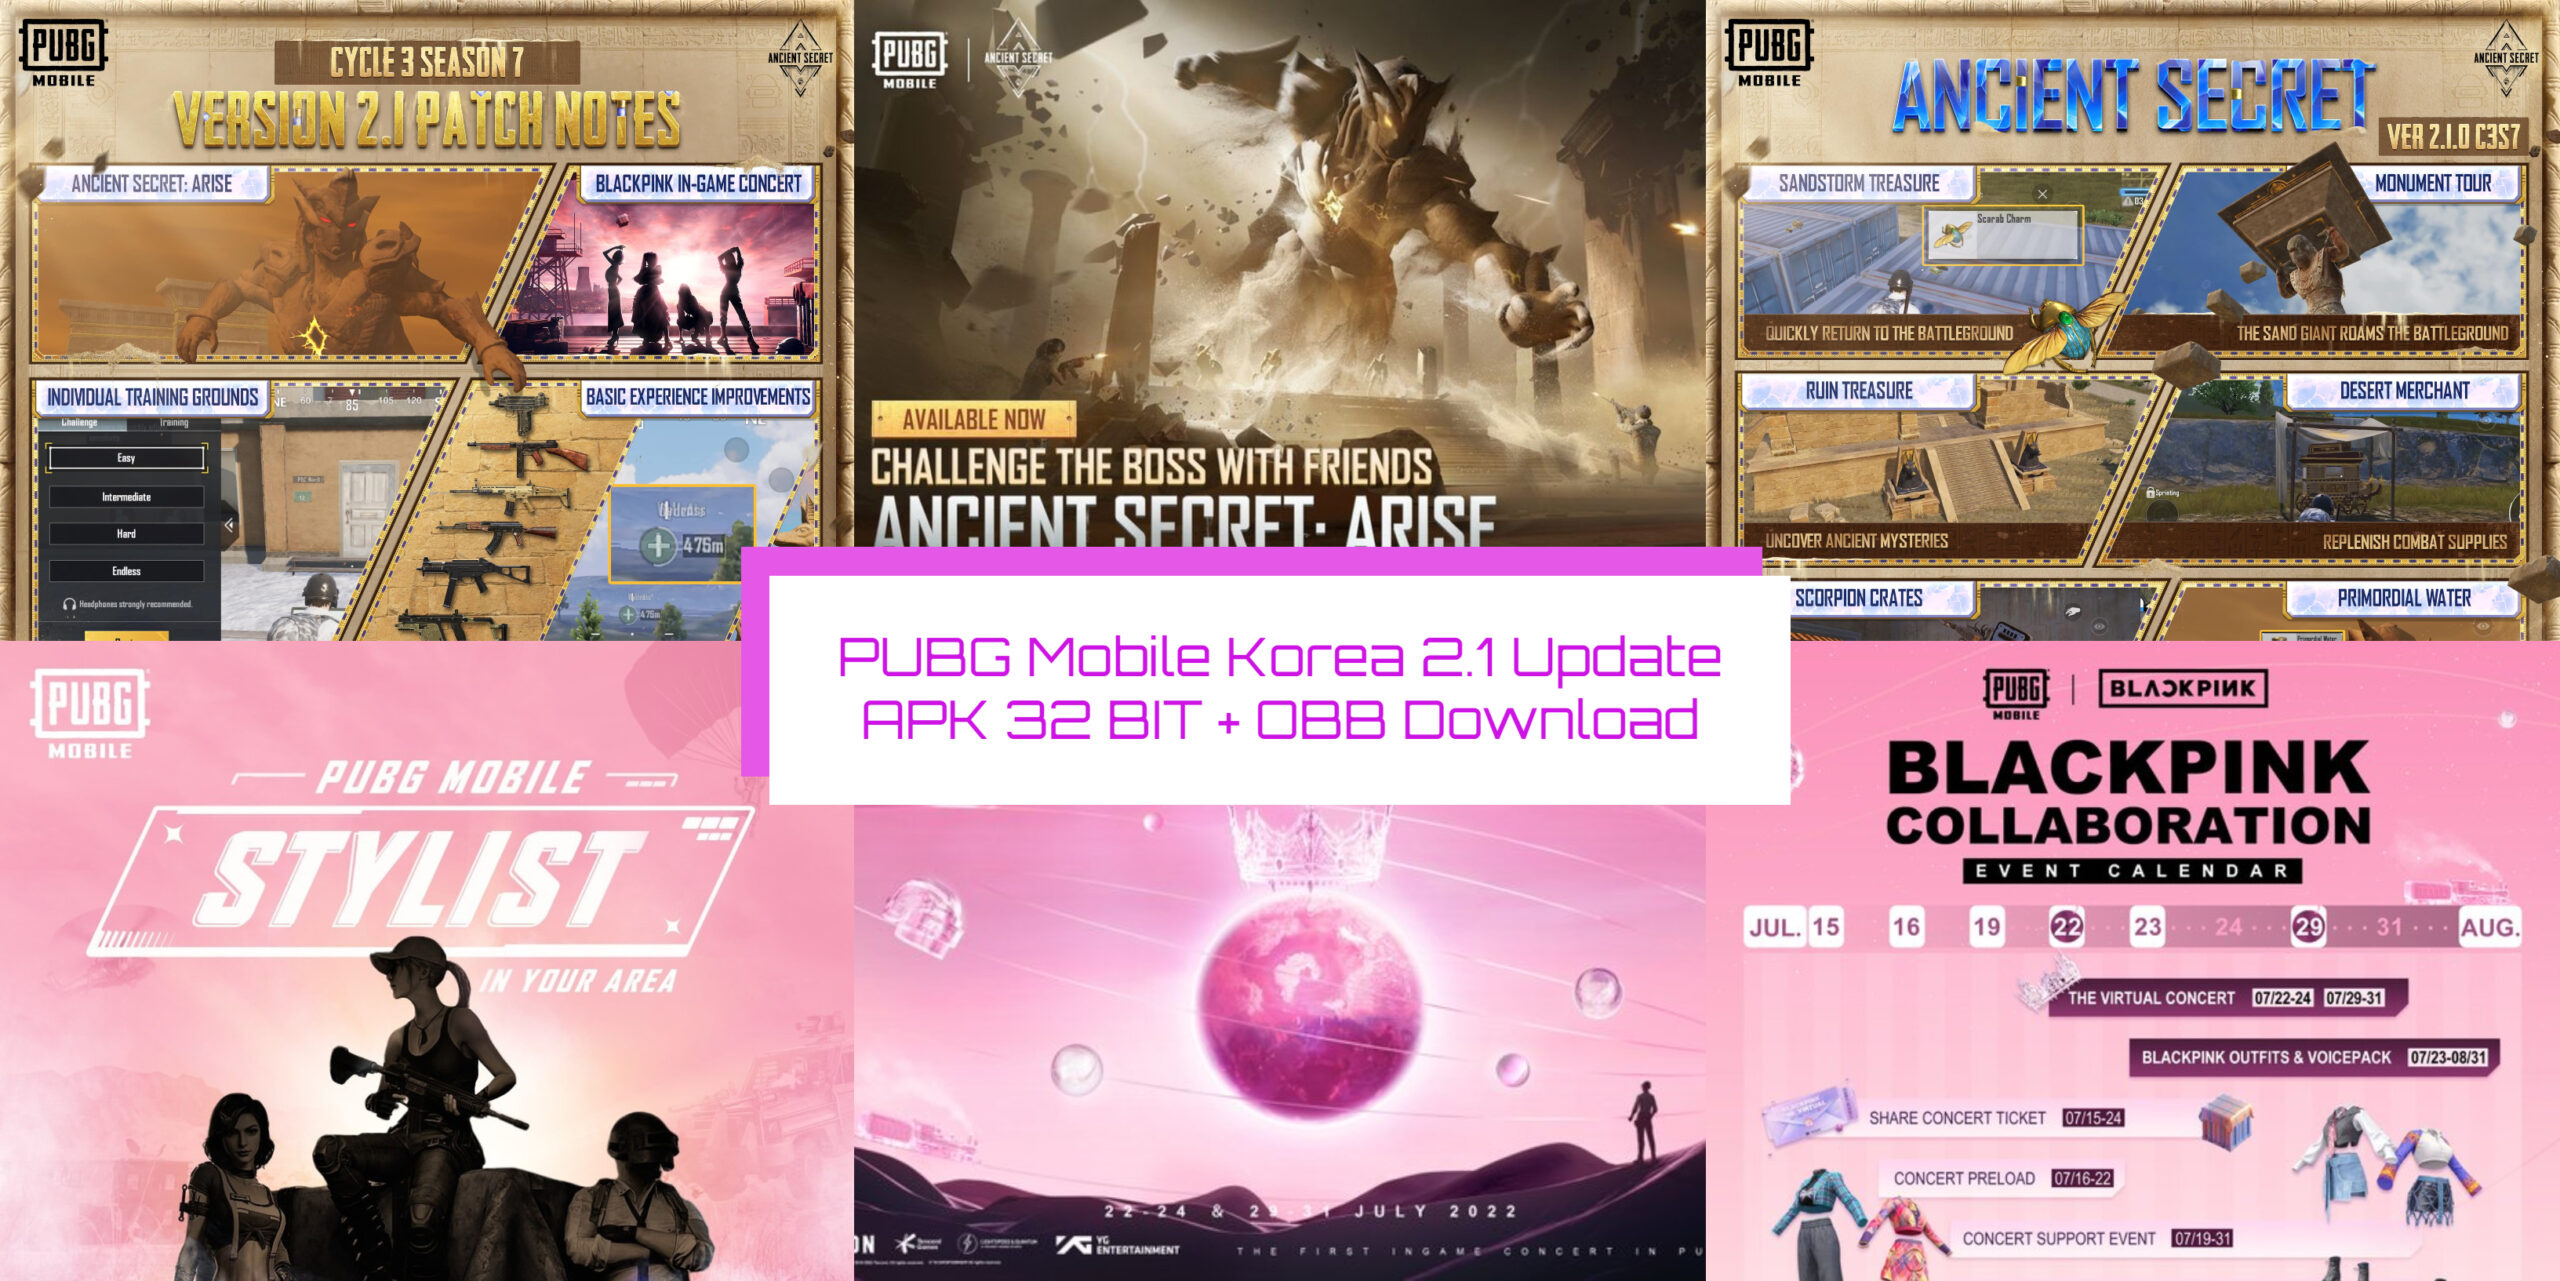 You are currently viewing PUBG Mobile Korea 2.1 Update APK 32 BIT + OBB Download